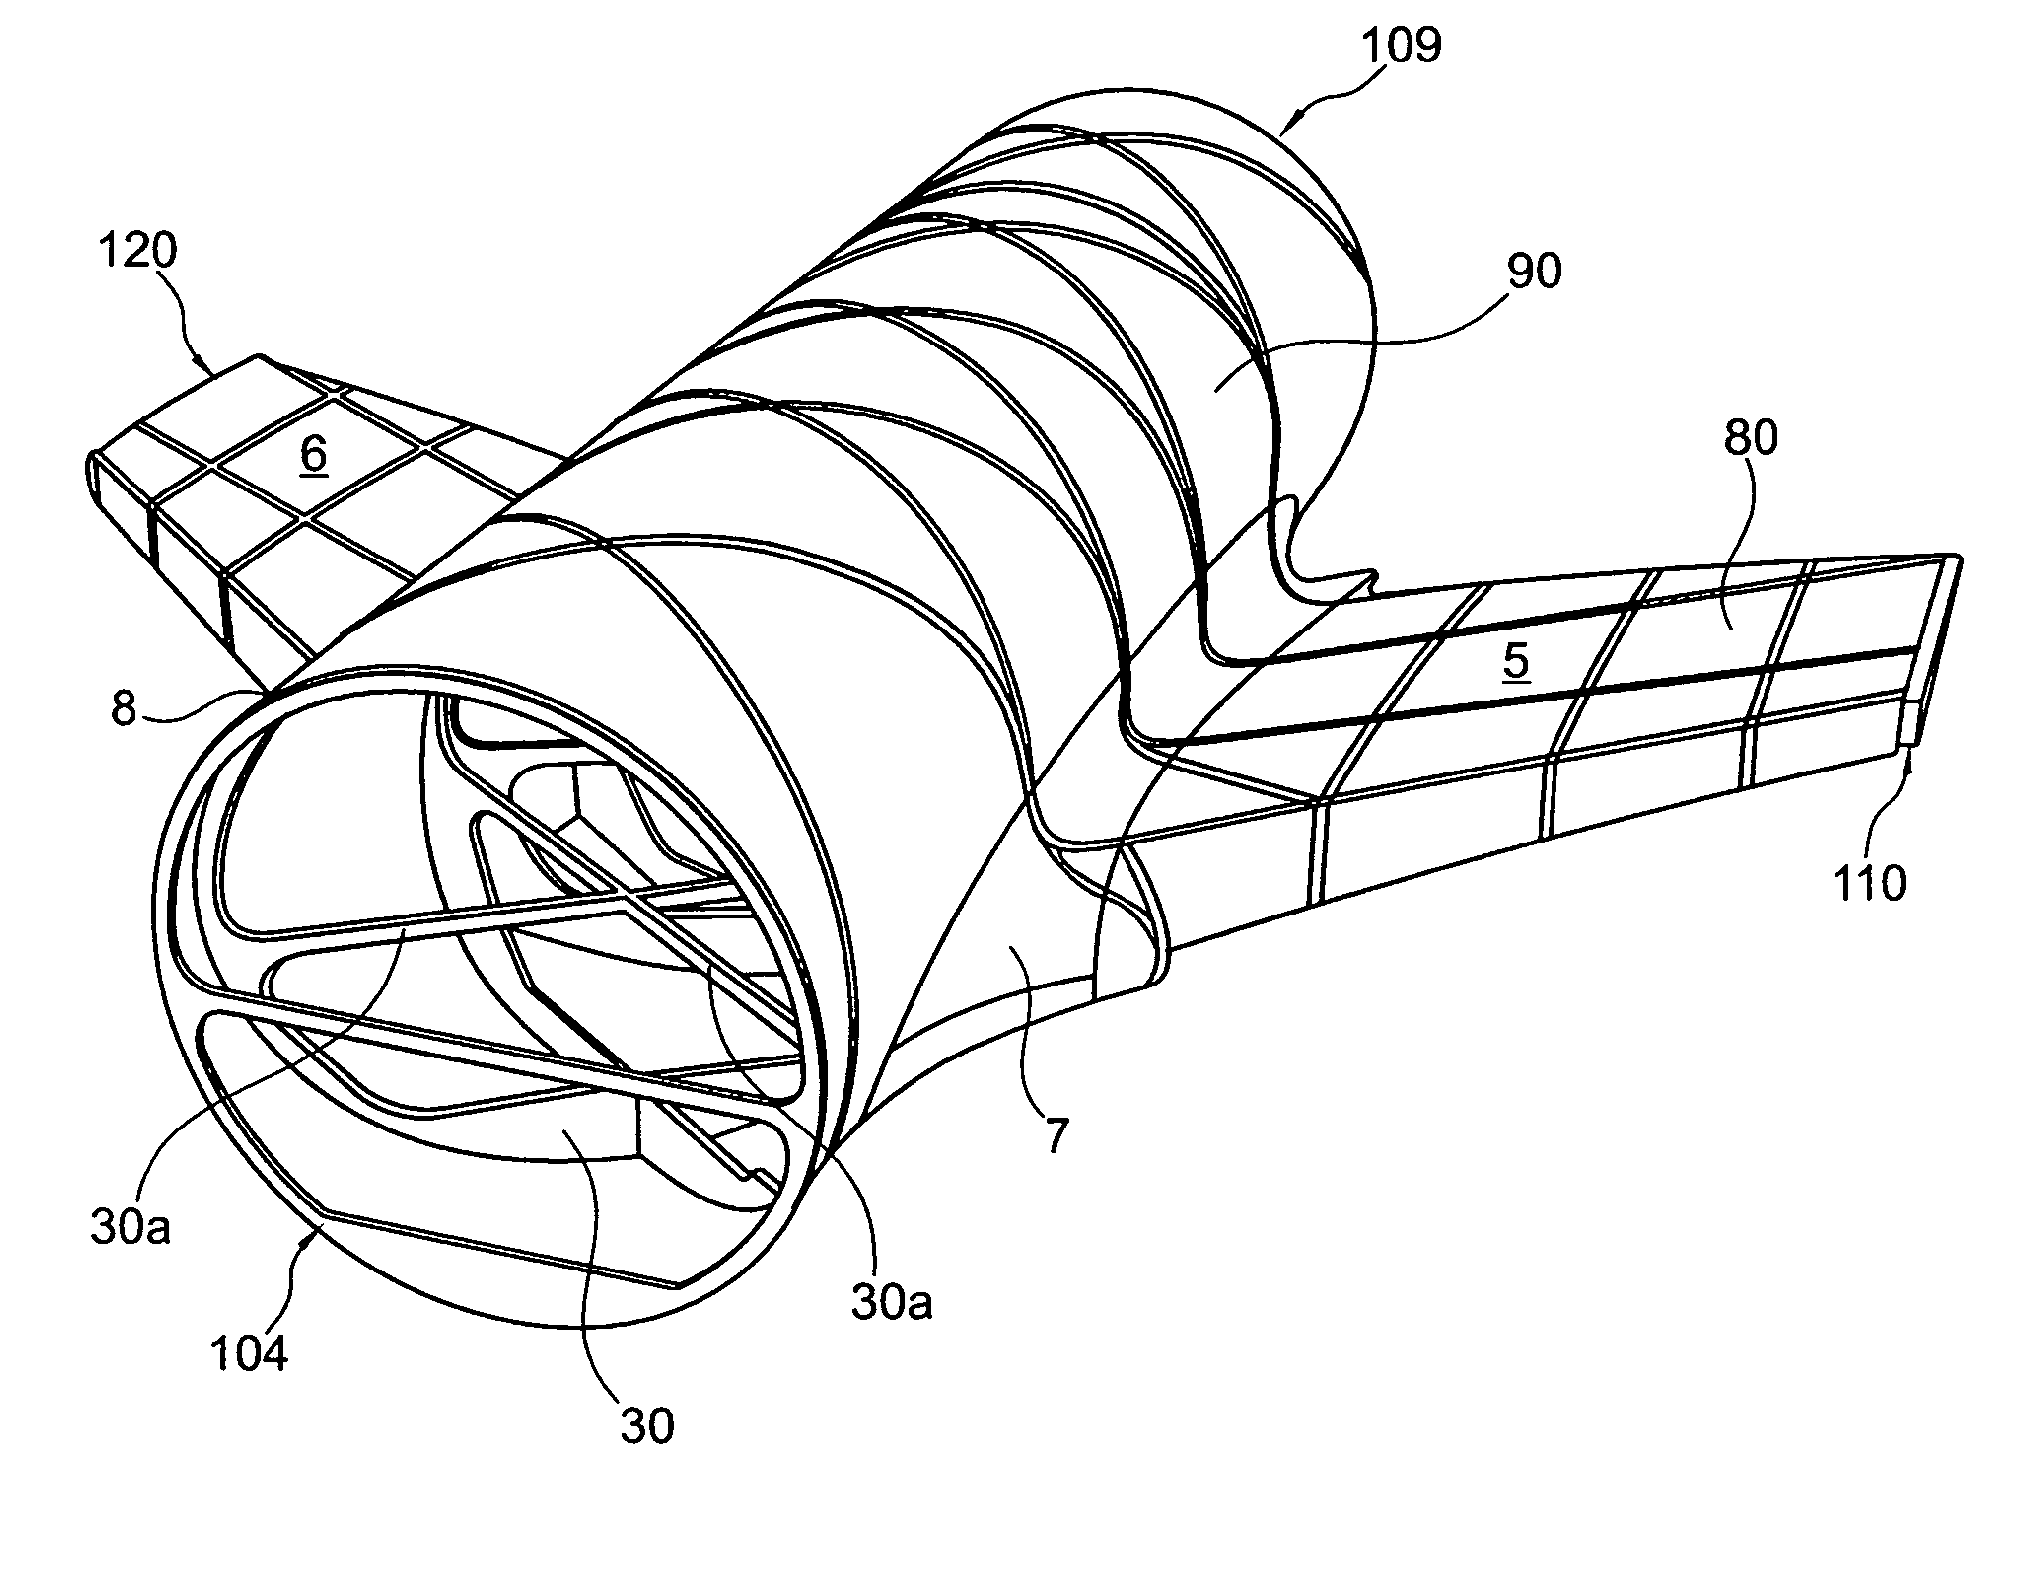 Wing-fuselage section of an aircraft